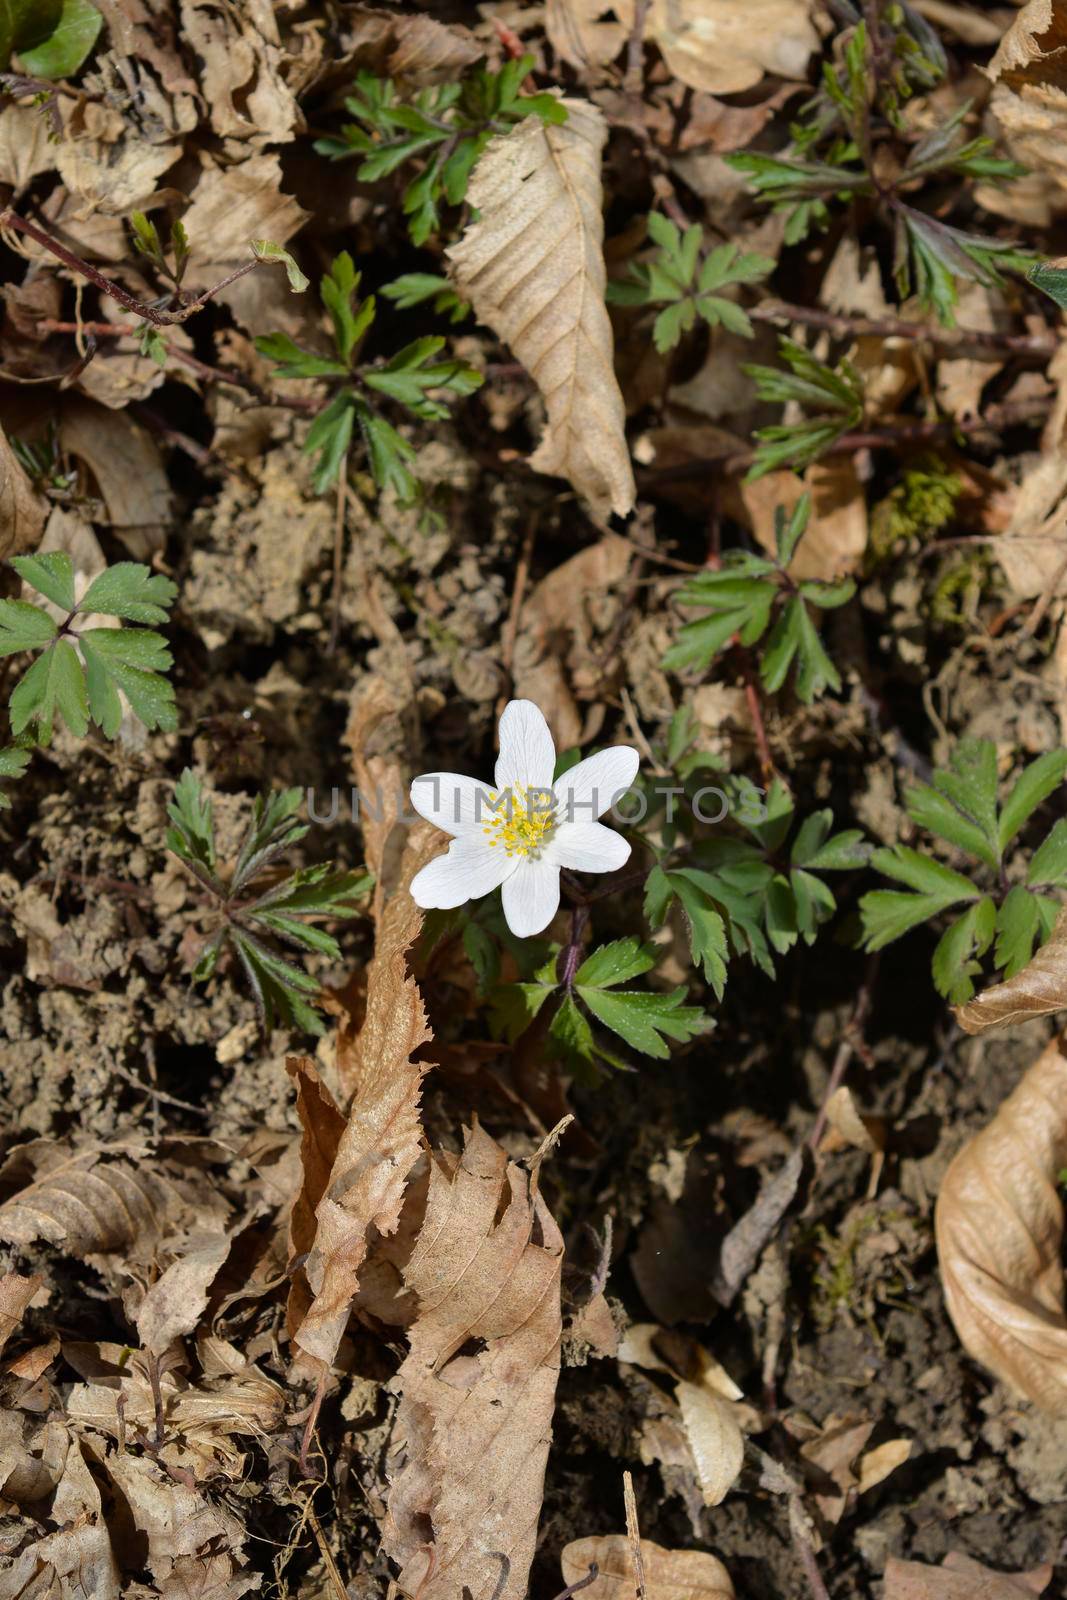 Wood anemone by nahhan